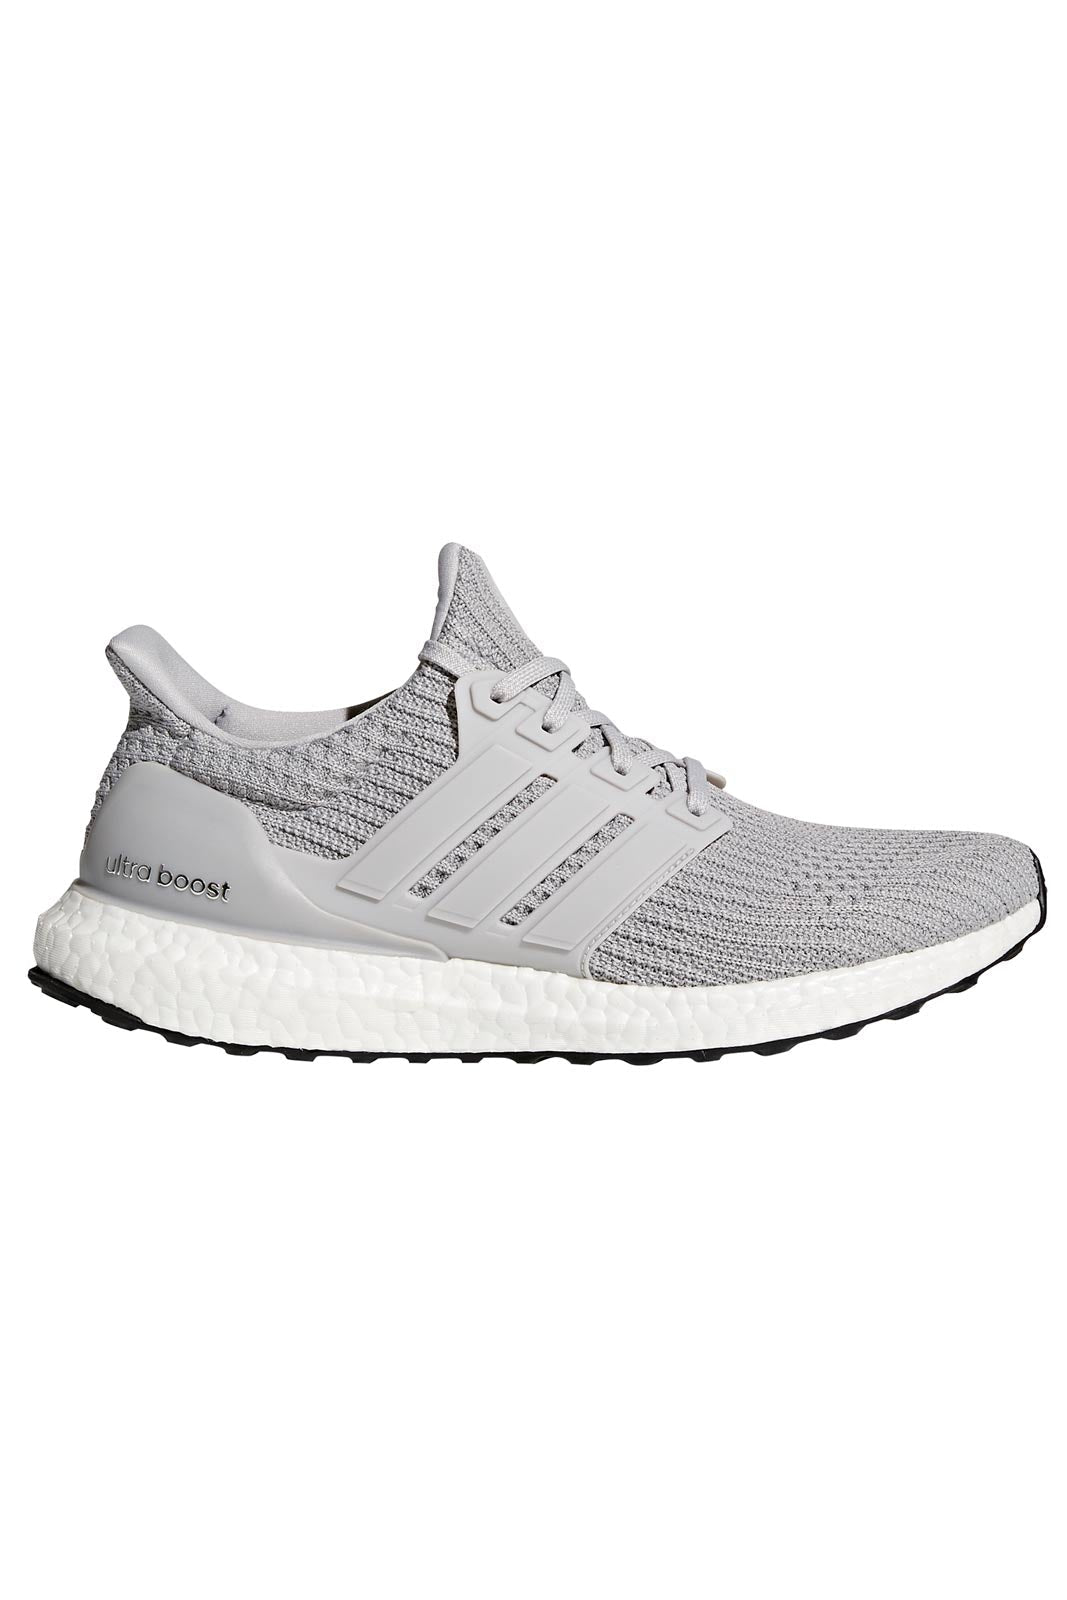 adidas ultra boost 4.0 mens Sale,up to 